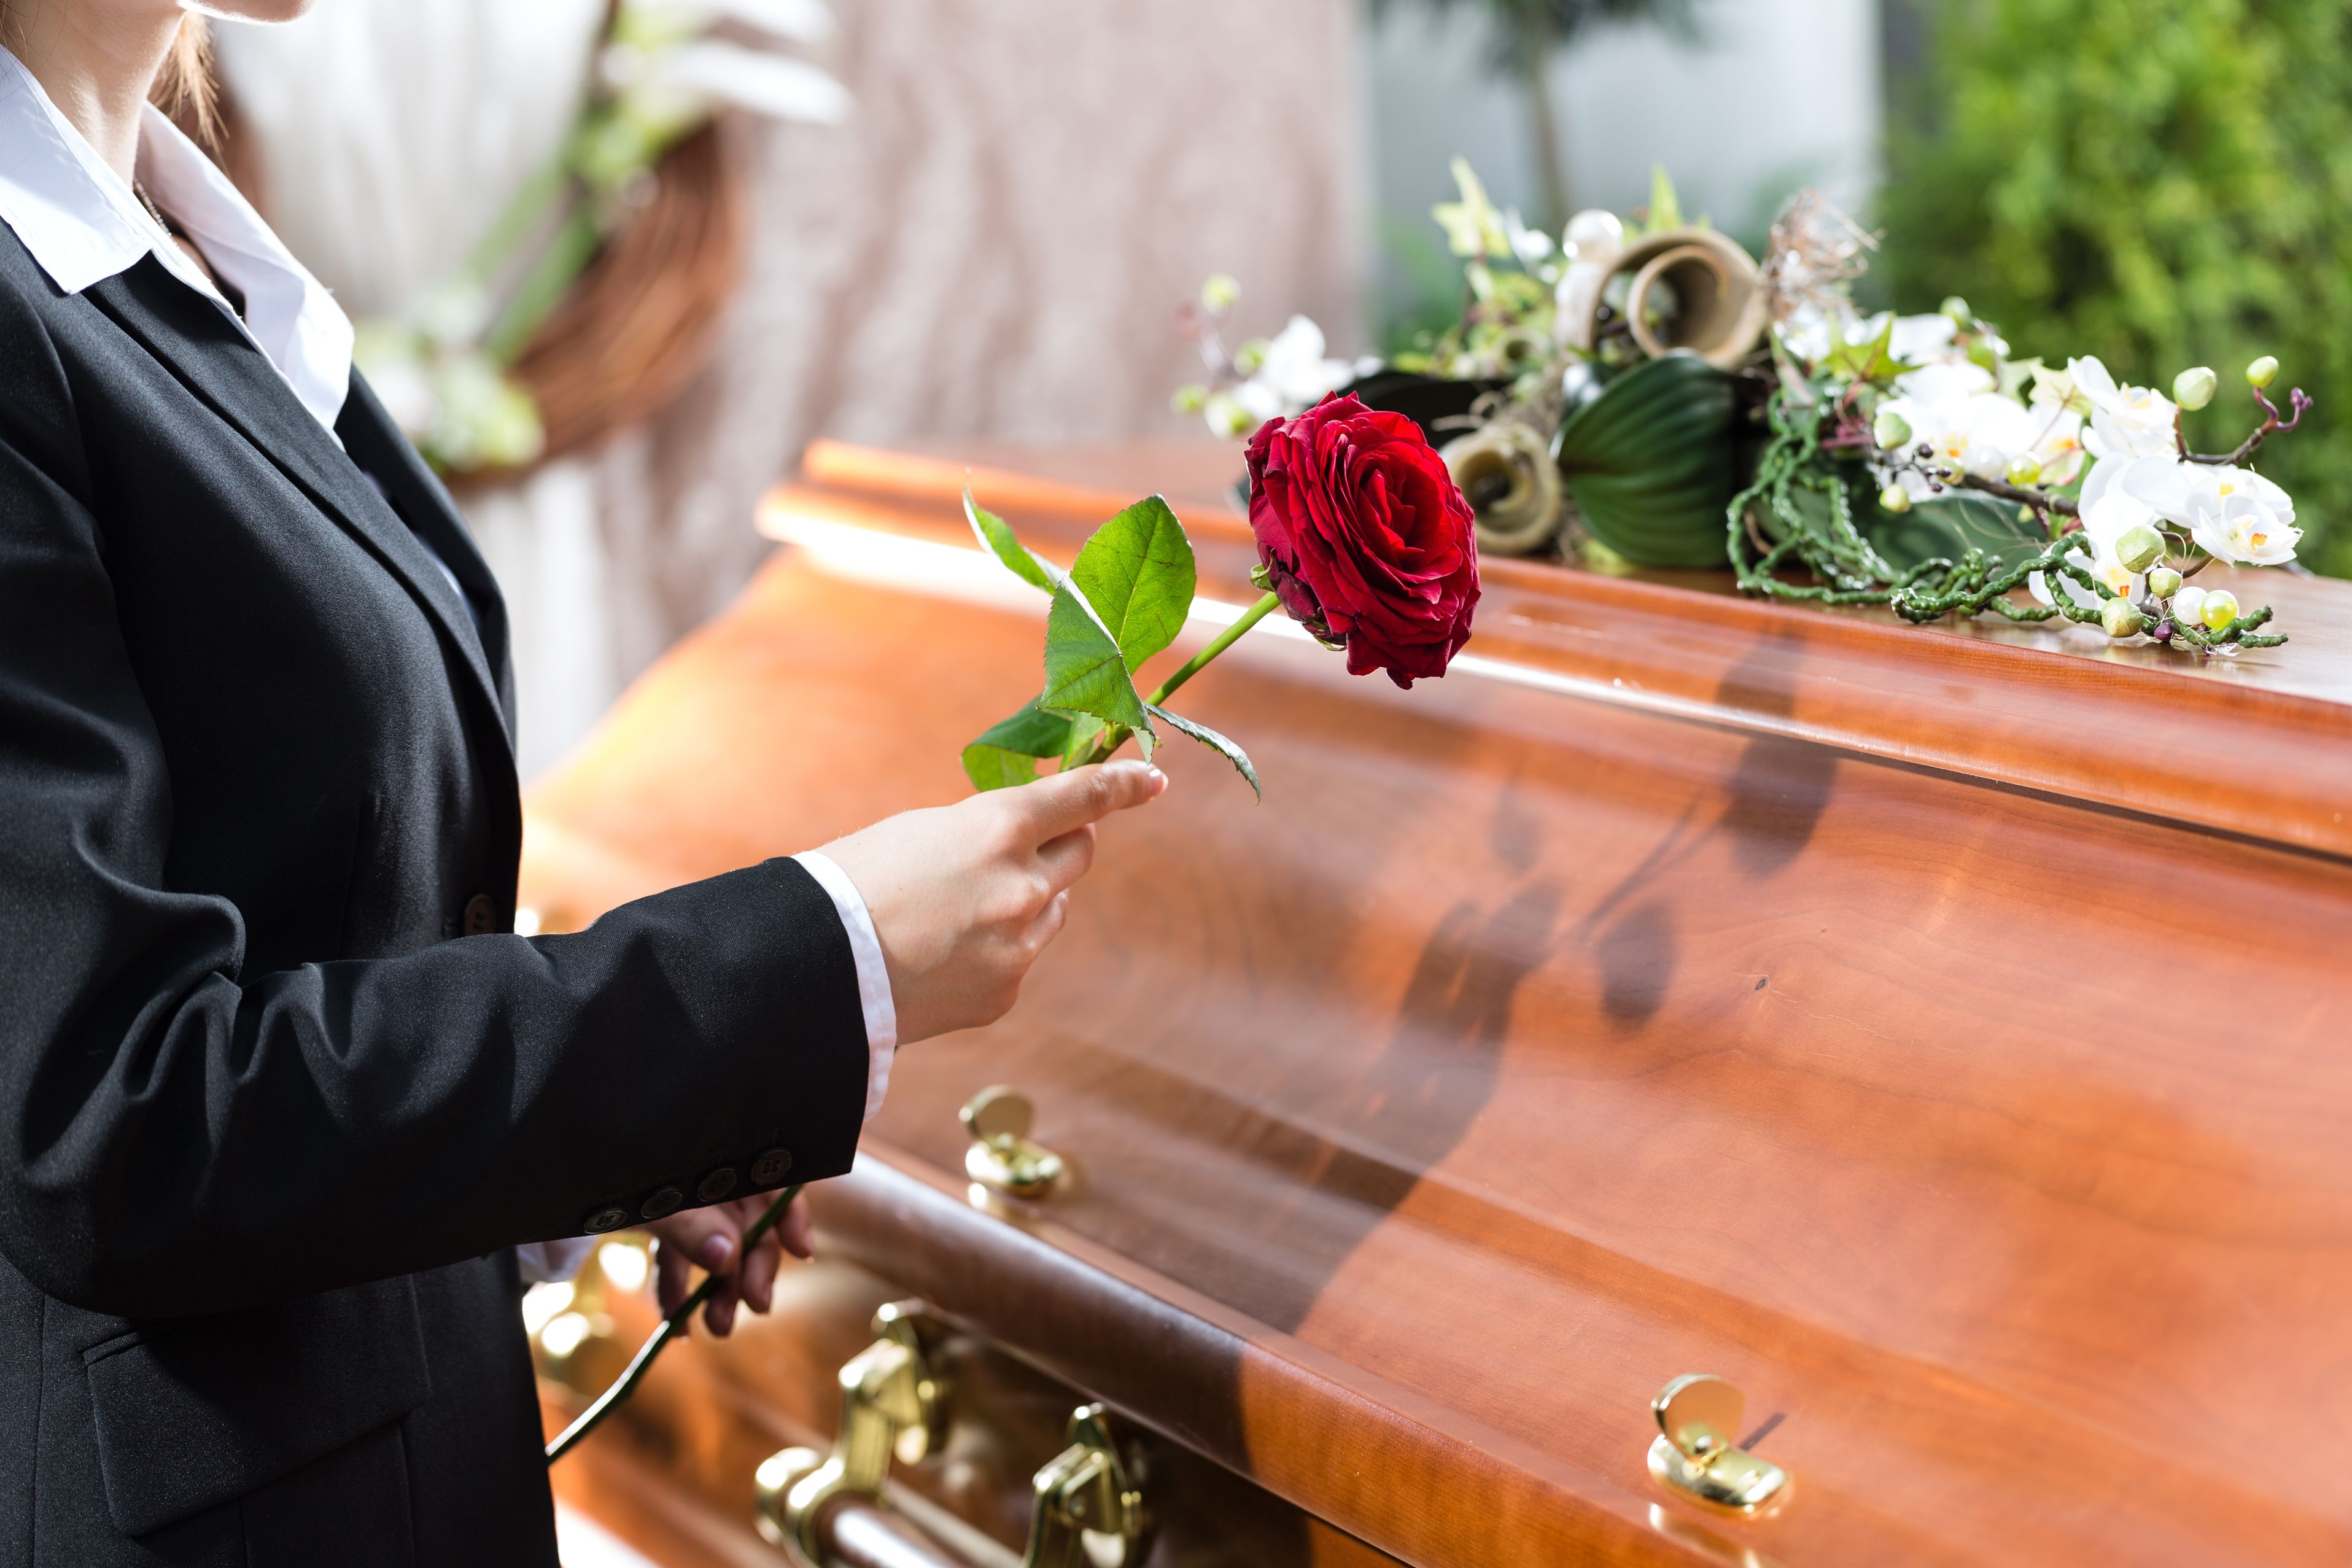 Funeral Homes Offer Different Types of Burials in Fort Dodge for Your Loved Ones